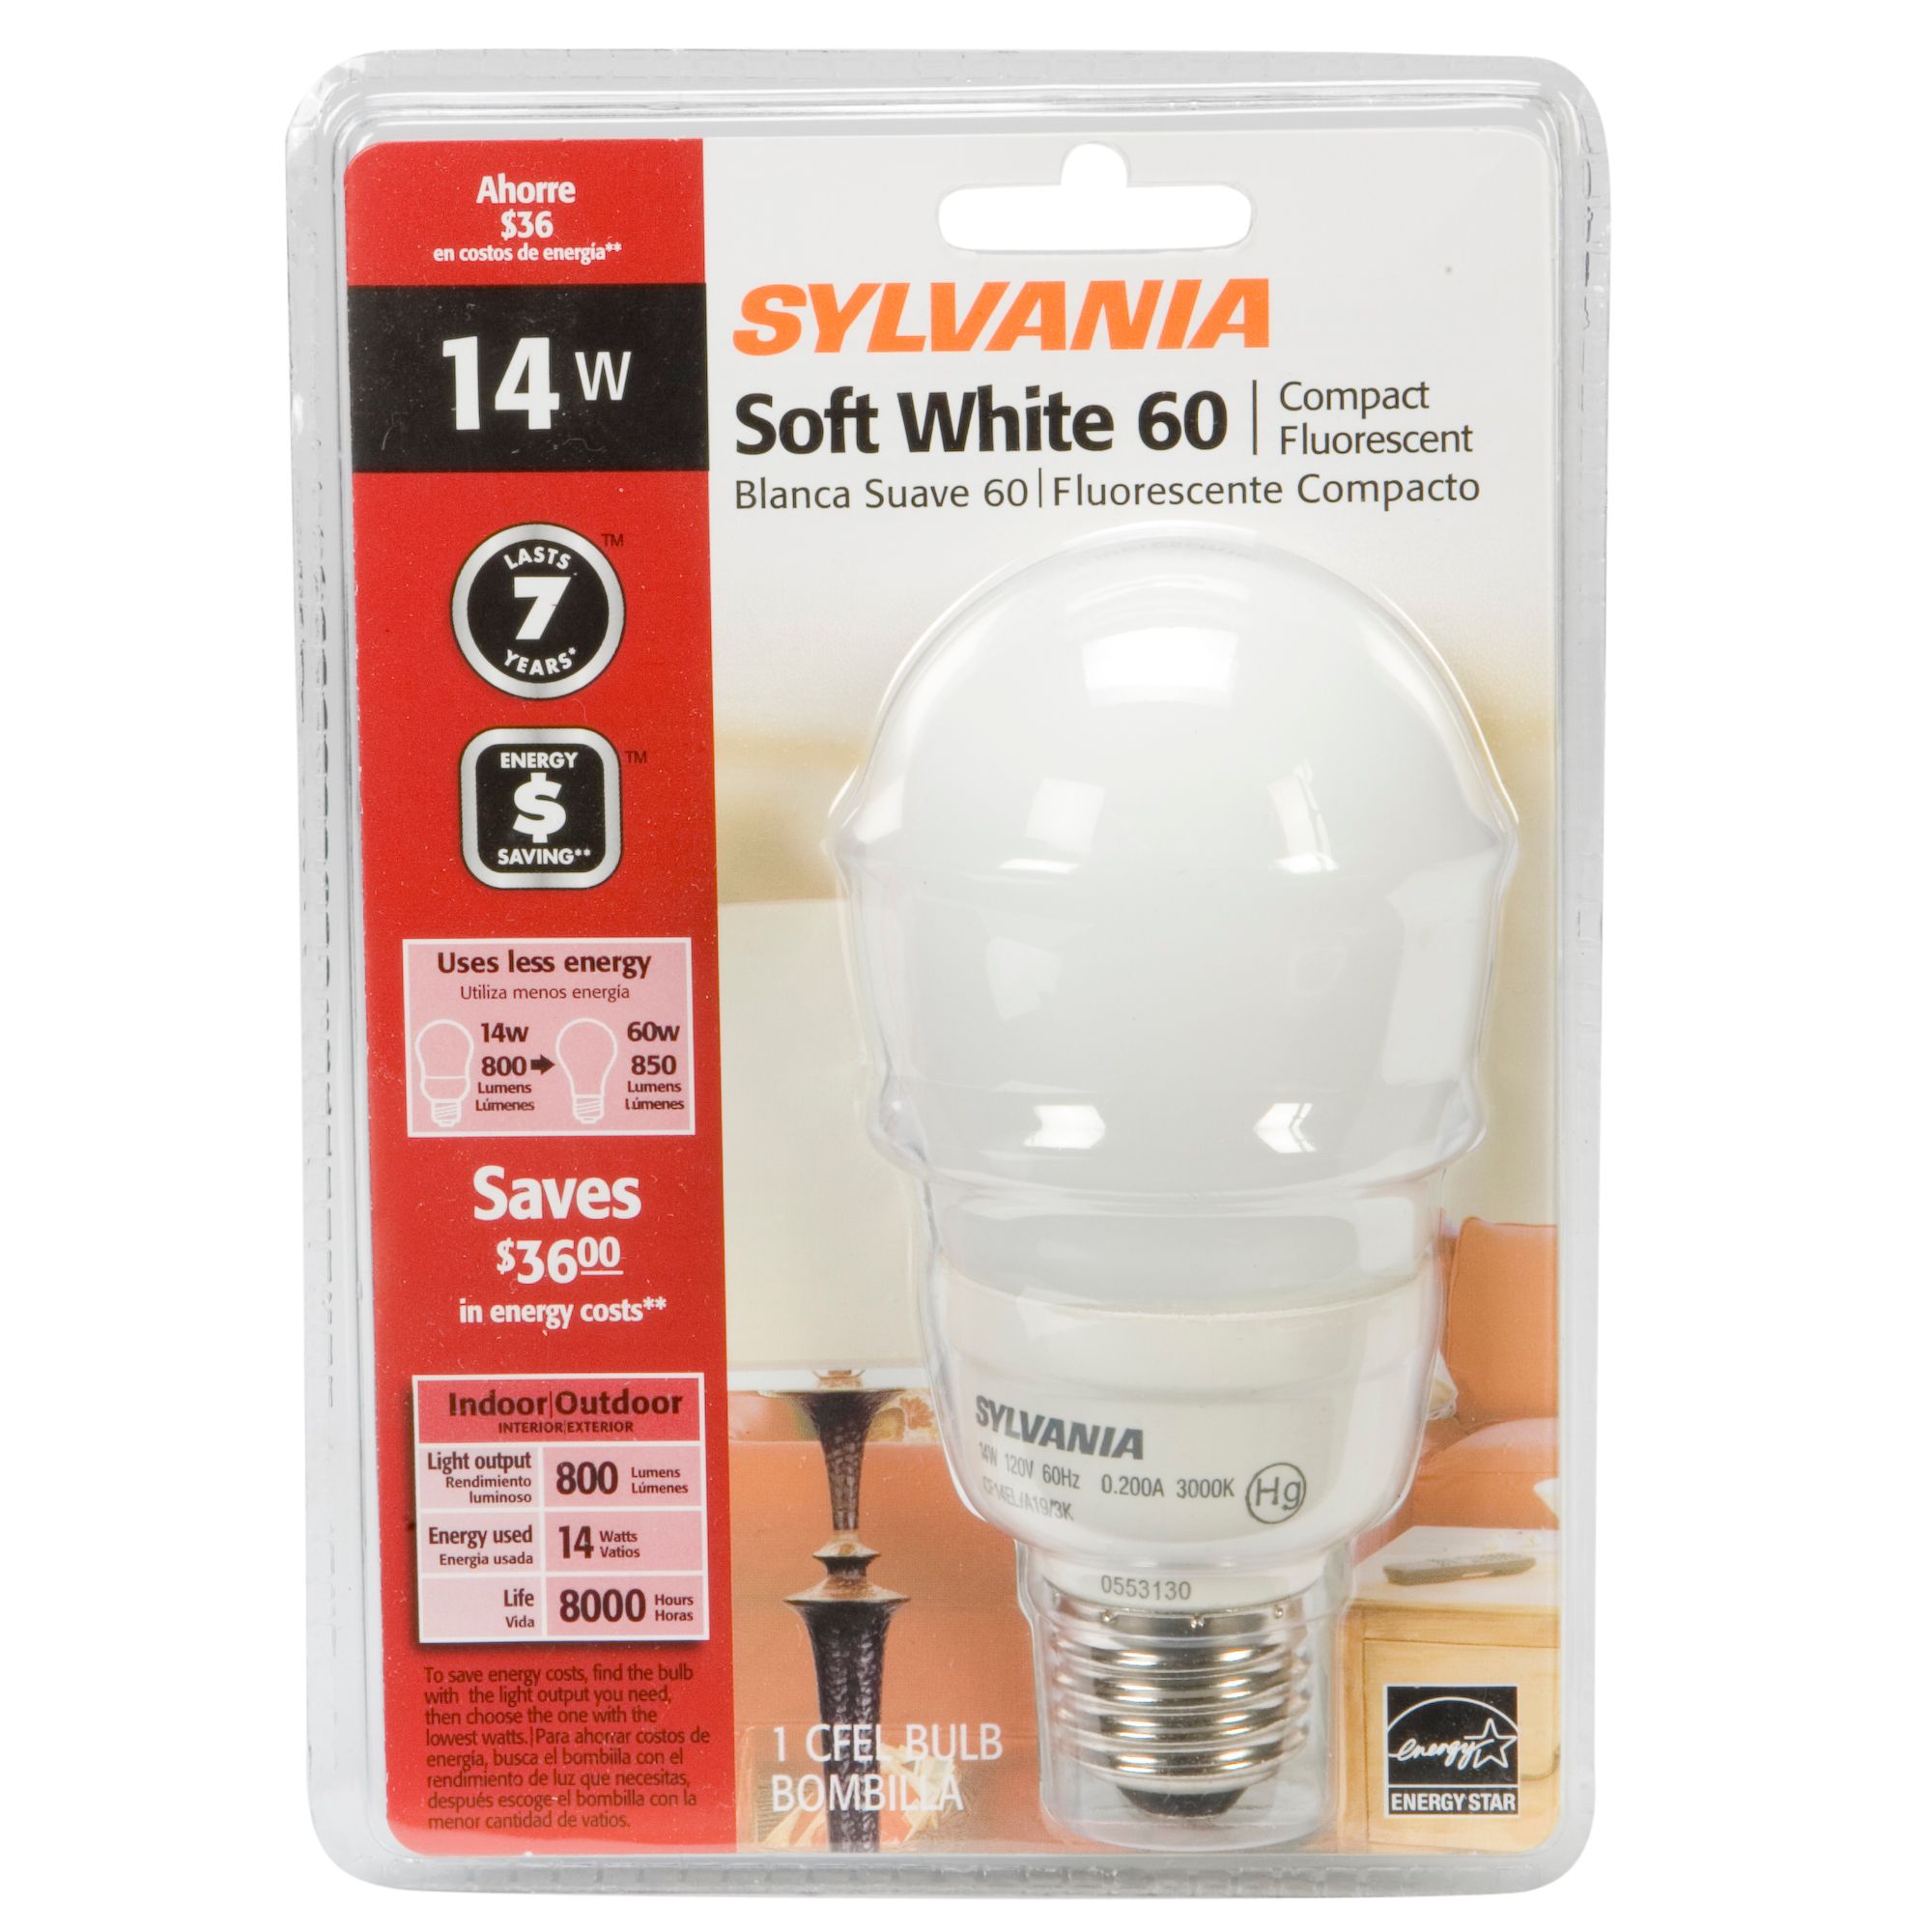 Sylvania 14W Compact Classic Fluorescent with A-line Cover